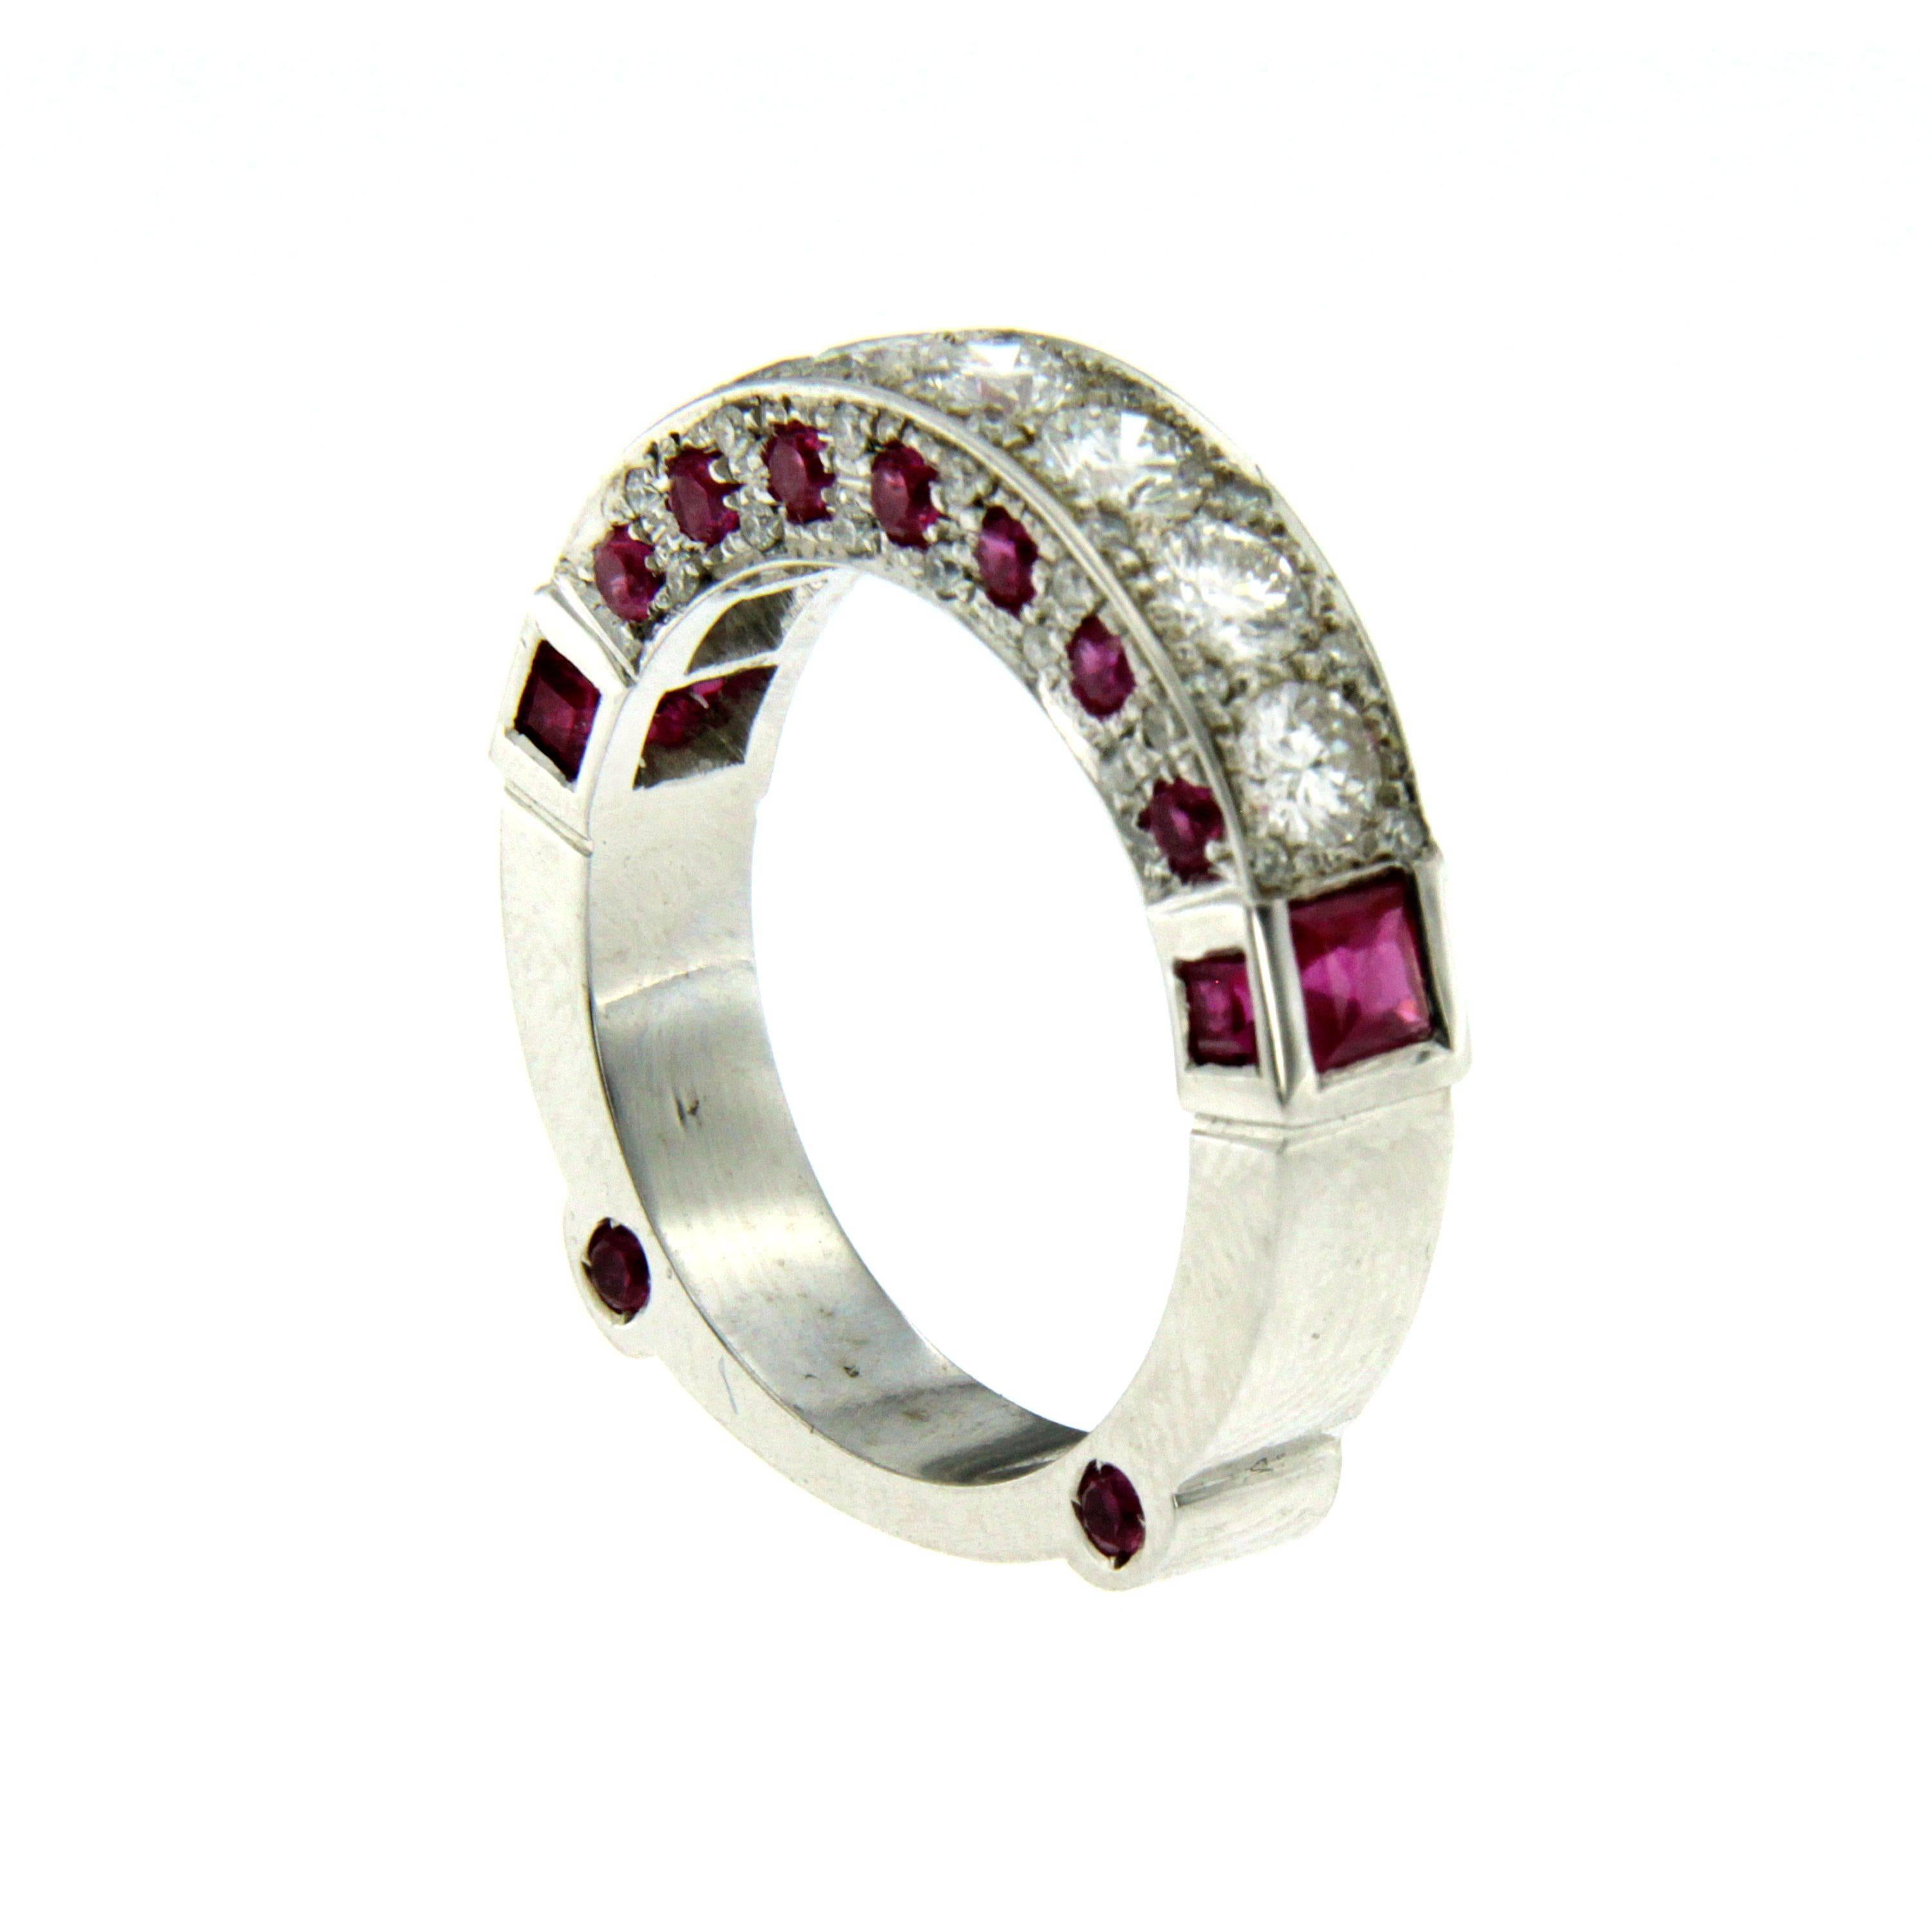 This stunning white gold band ring features round brilliant cut diamonds with a total weigh of 1.10 carats G color VVs, and 0.70 cts of fine rubies around the band's surface on both sides.

CONDITION: Brand New
METAL: 18k gold
GEM STONE: Diamond